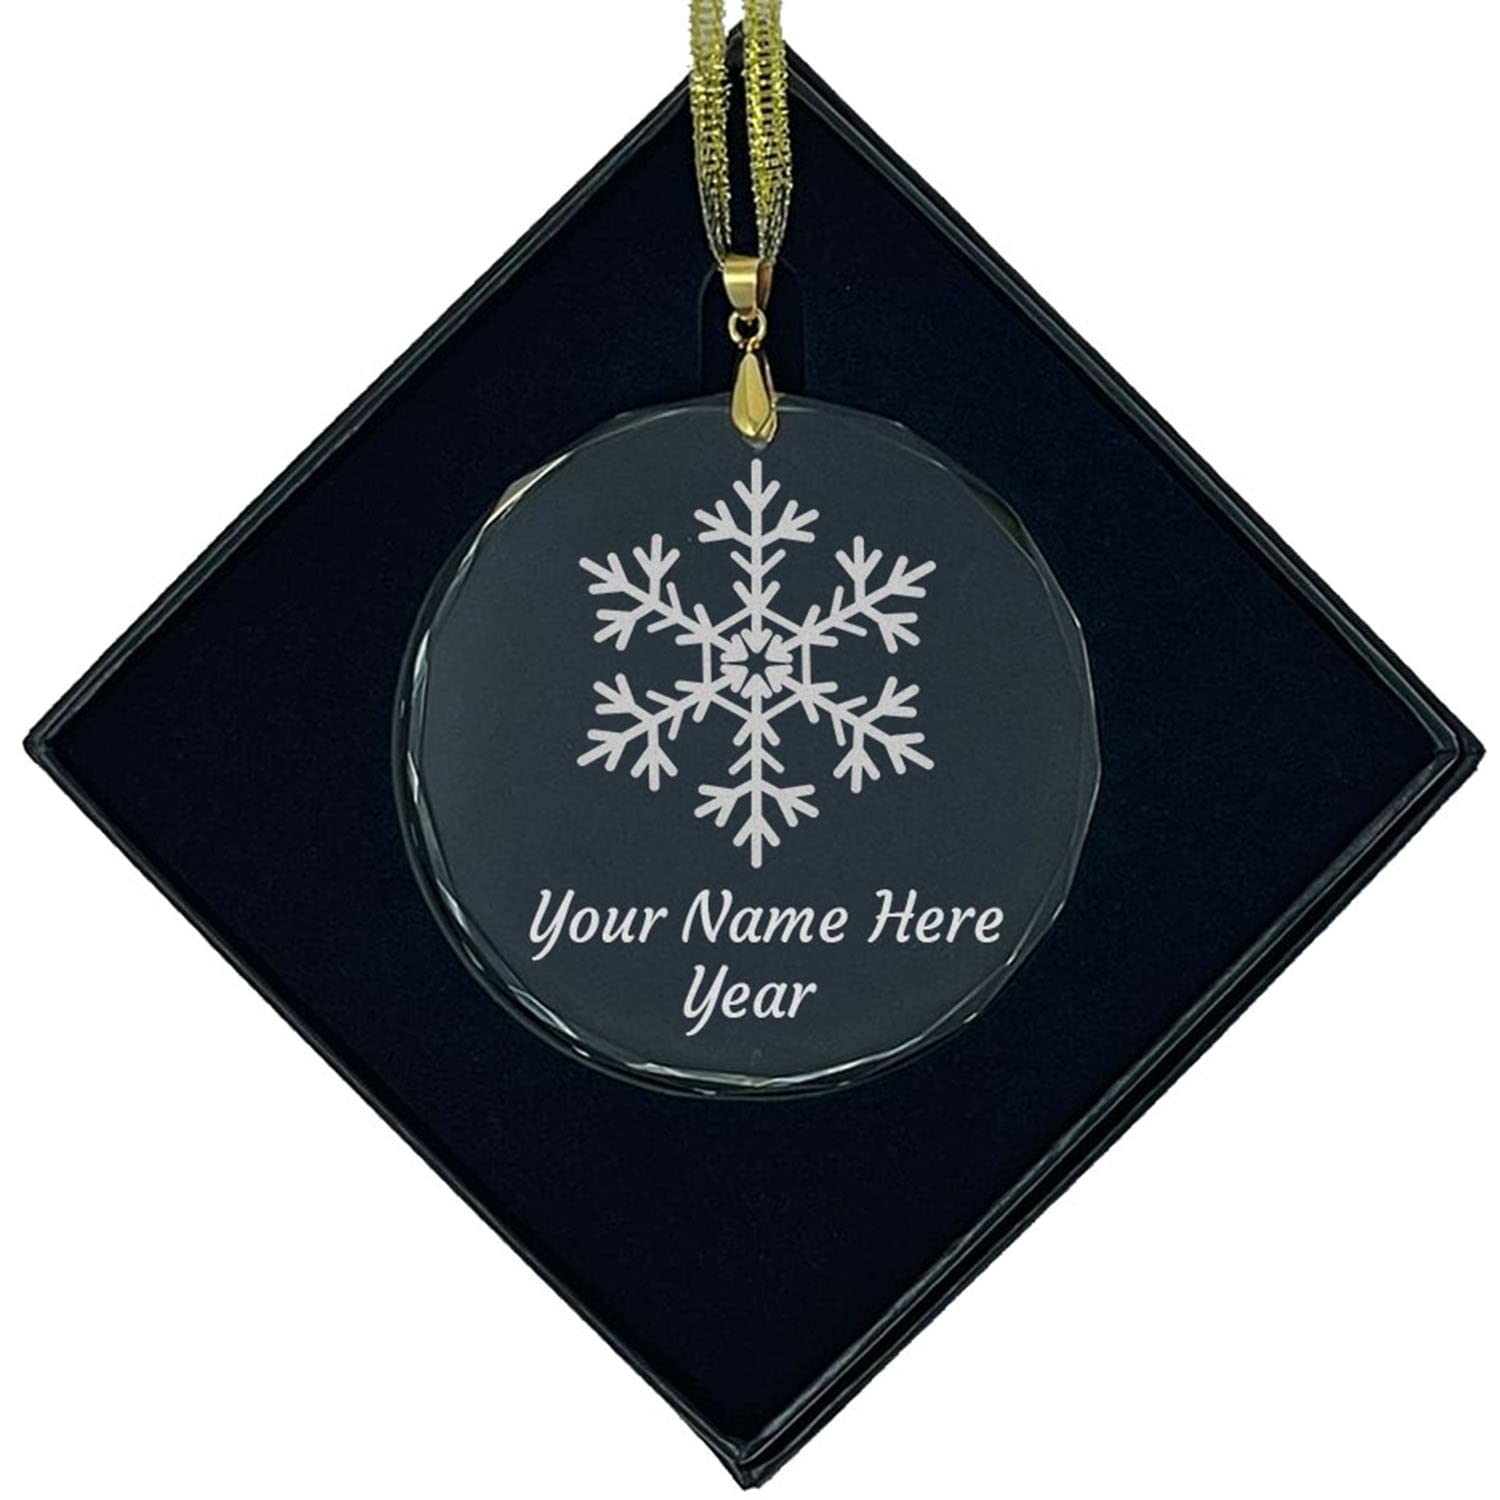 LaserGram Christmas Ornament, Snowflake, Personalized Engraving Included (Round Shape)